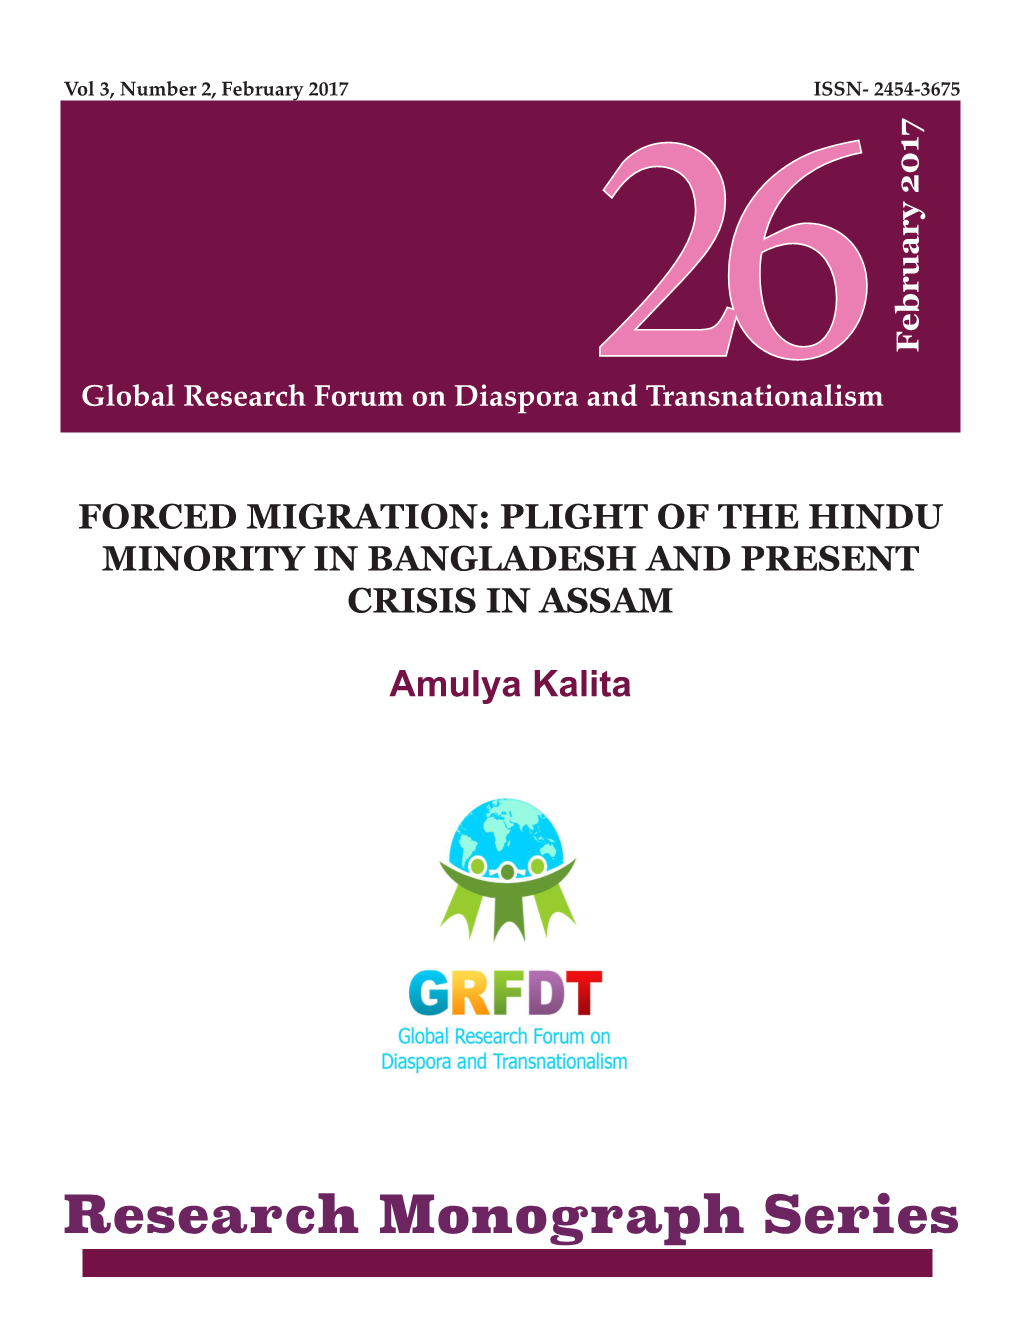 Forced Migration: Plight of the Hindu Minority in Bangladesh and Present Crisis in Assam